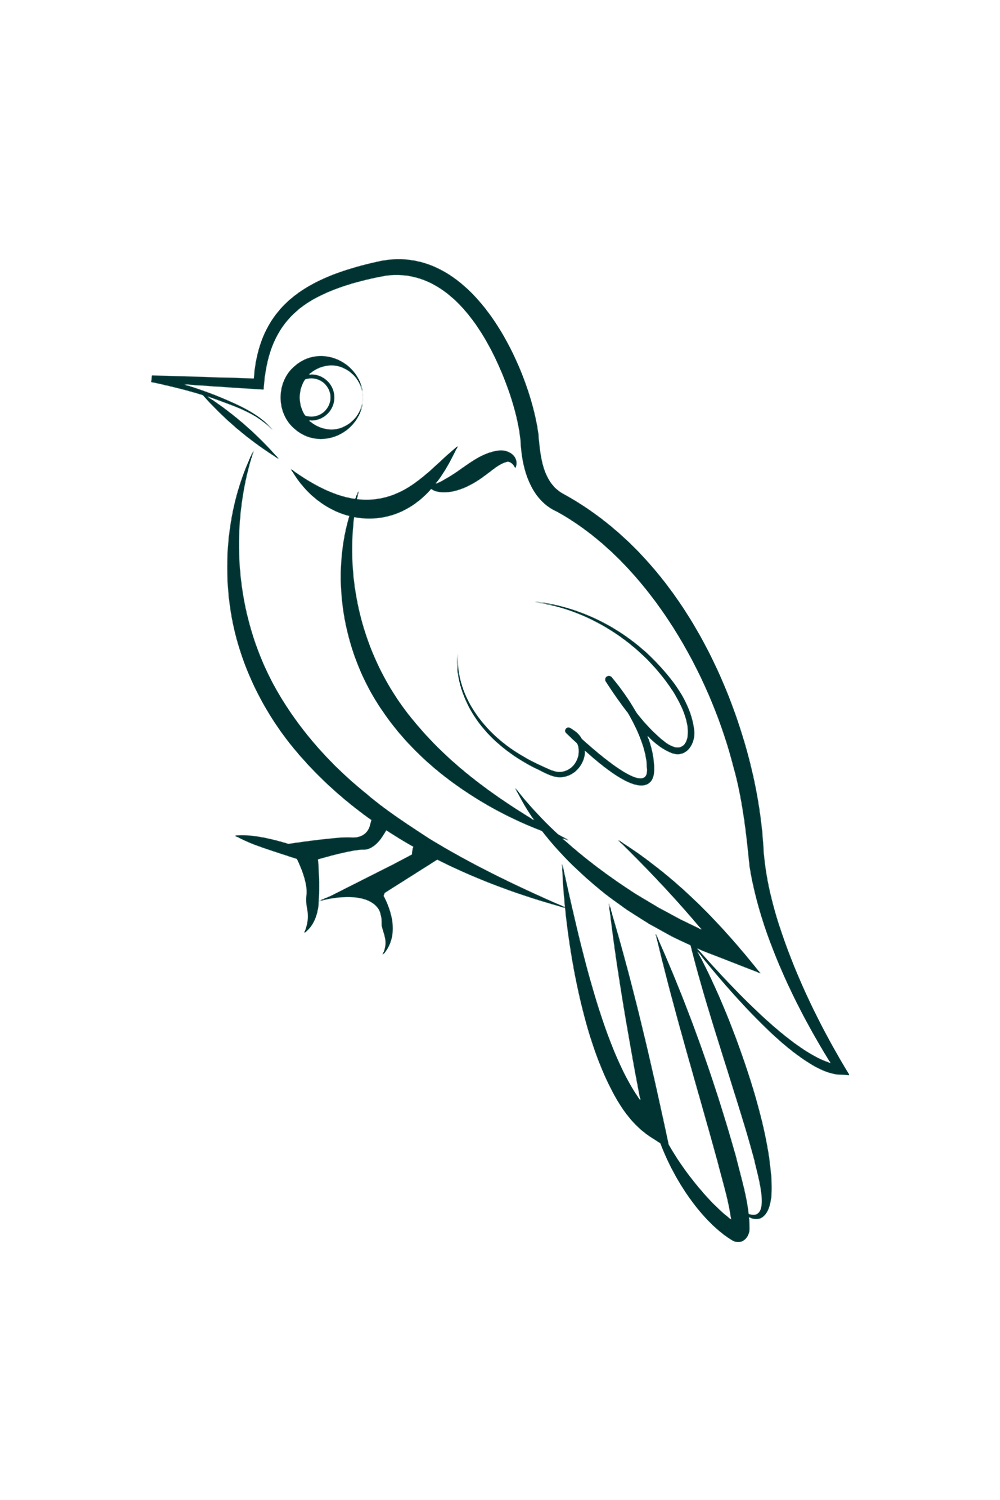 Flying Bird - Dove Or Pigeon With Its Wings Spread Line Art Vector Icon For  Nature Apps And Websites Royalty Free SVG, Cliparts, Vectors, and Stock  Illustration. Image 70392182.